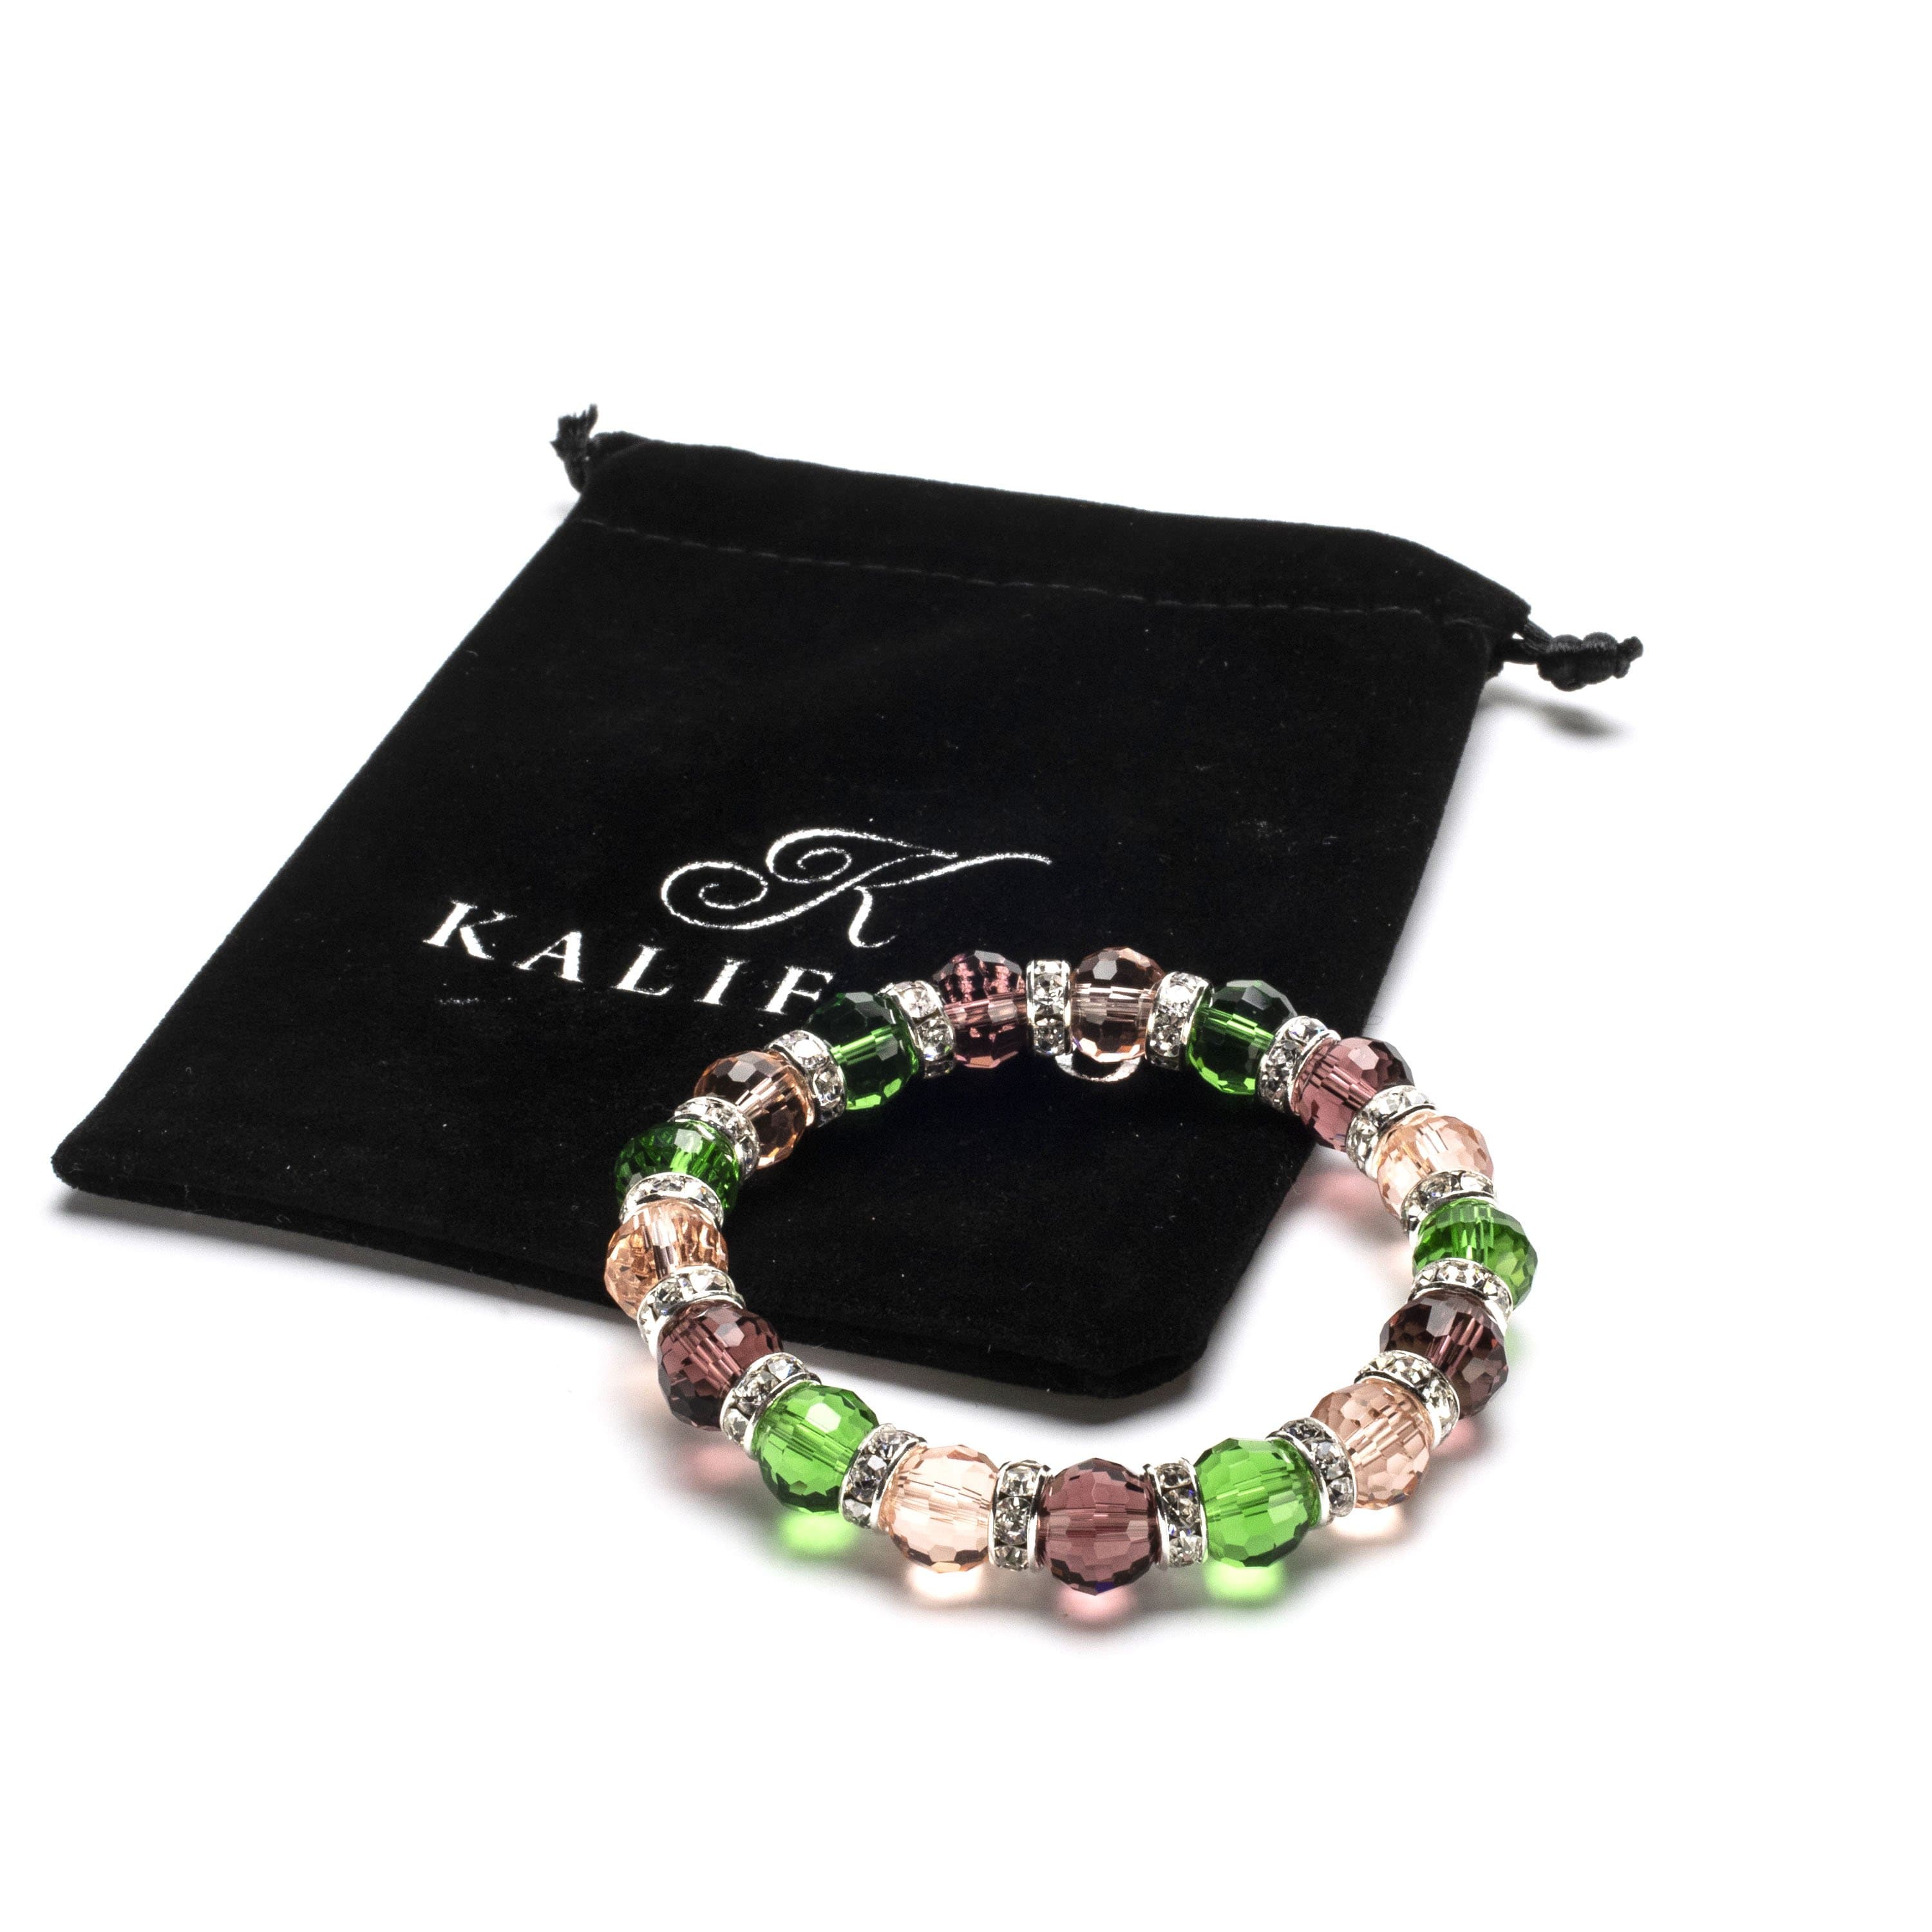 Kalifano Gorgeous Glass Jewelry Multicolored Gorgeous Glass Bracelet with Cubic Zirconia Crystals BLUE-BGG-N06